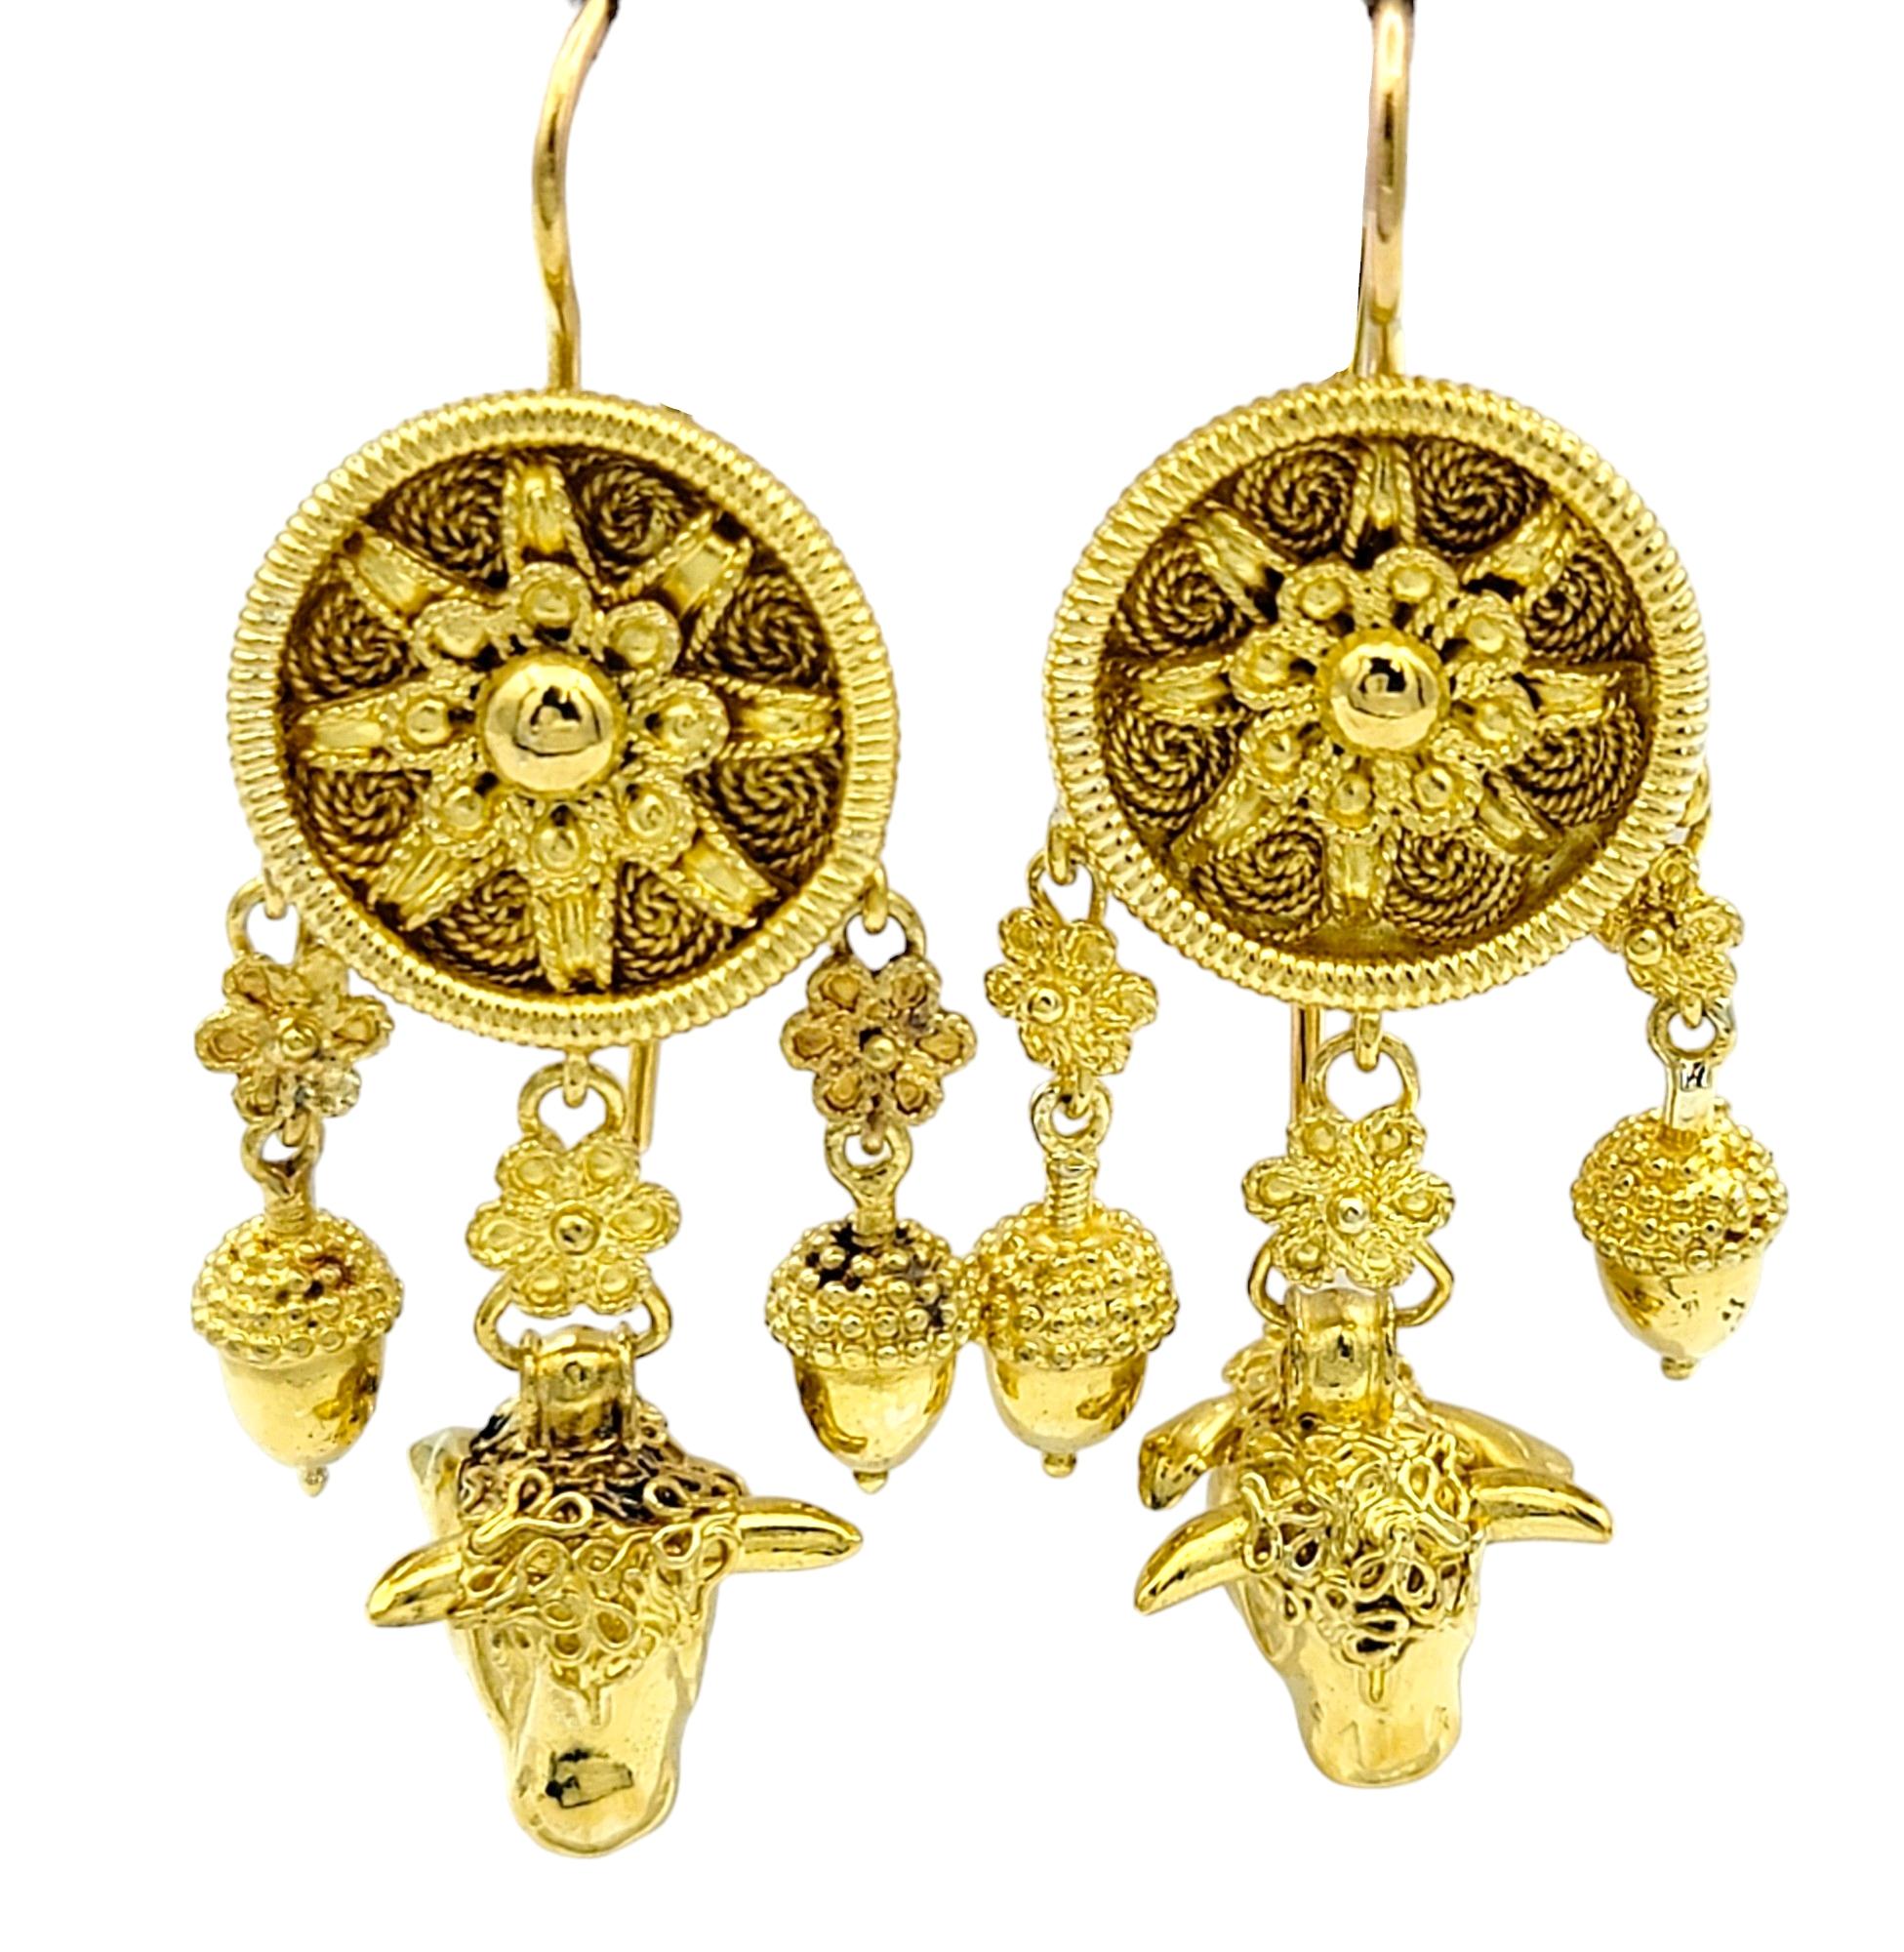 Crafted with intricate artistry and symbolic significance, these gold dangle earrings evoke the mystical allure of a dream catcher motif. Cast in luxurious 22 karat yellow gold, these earrings exude an aura of opulence and timeless elegance. There